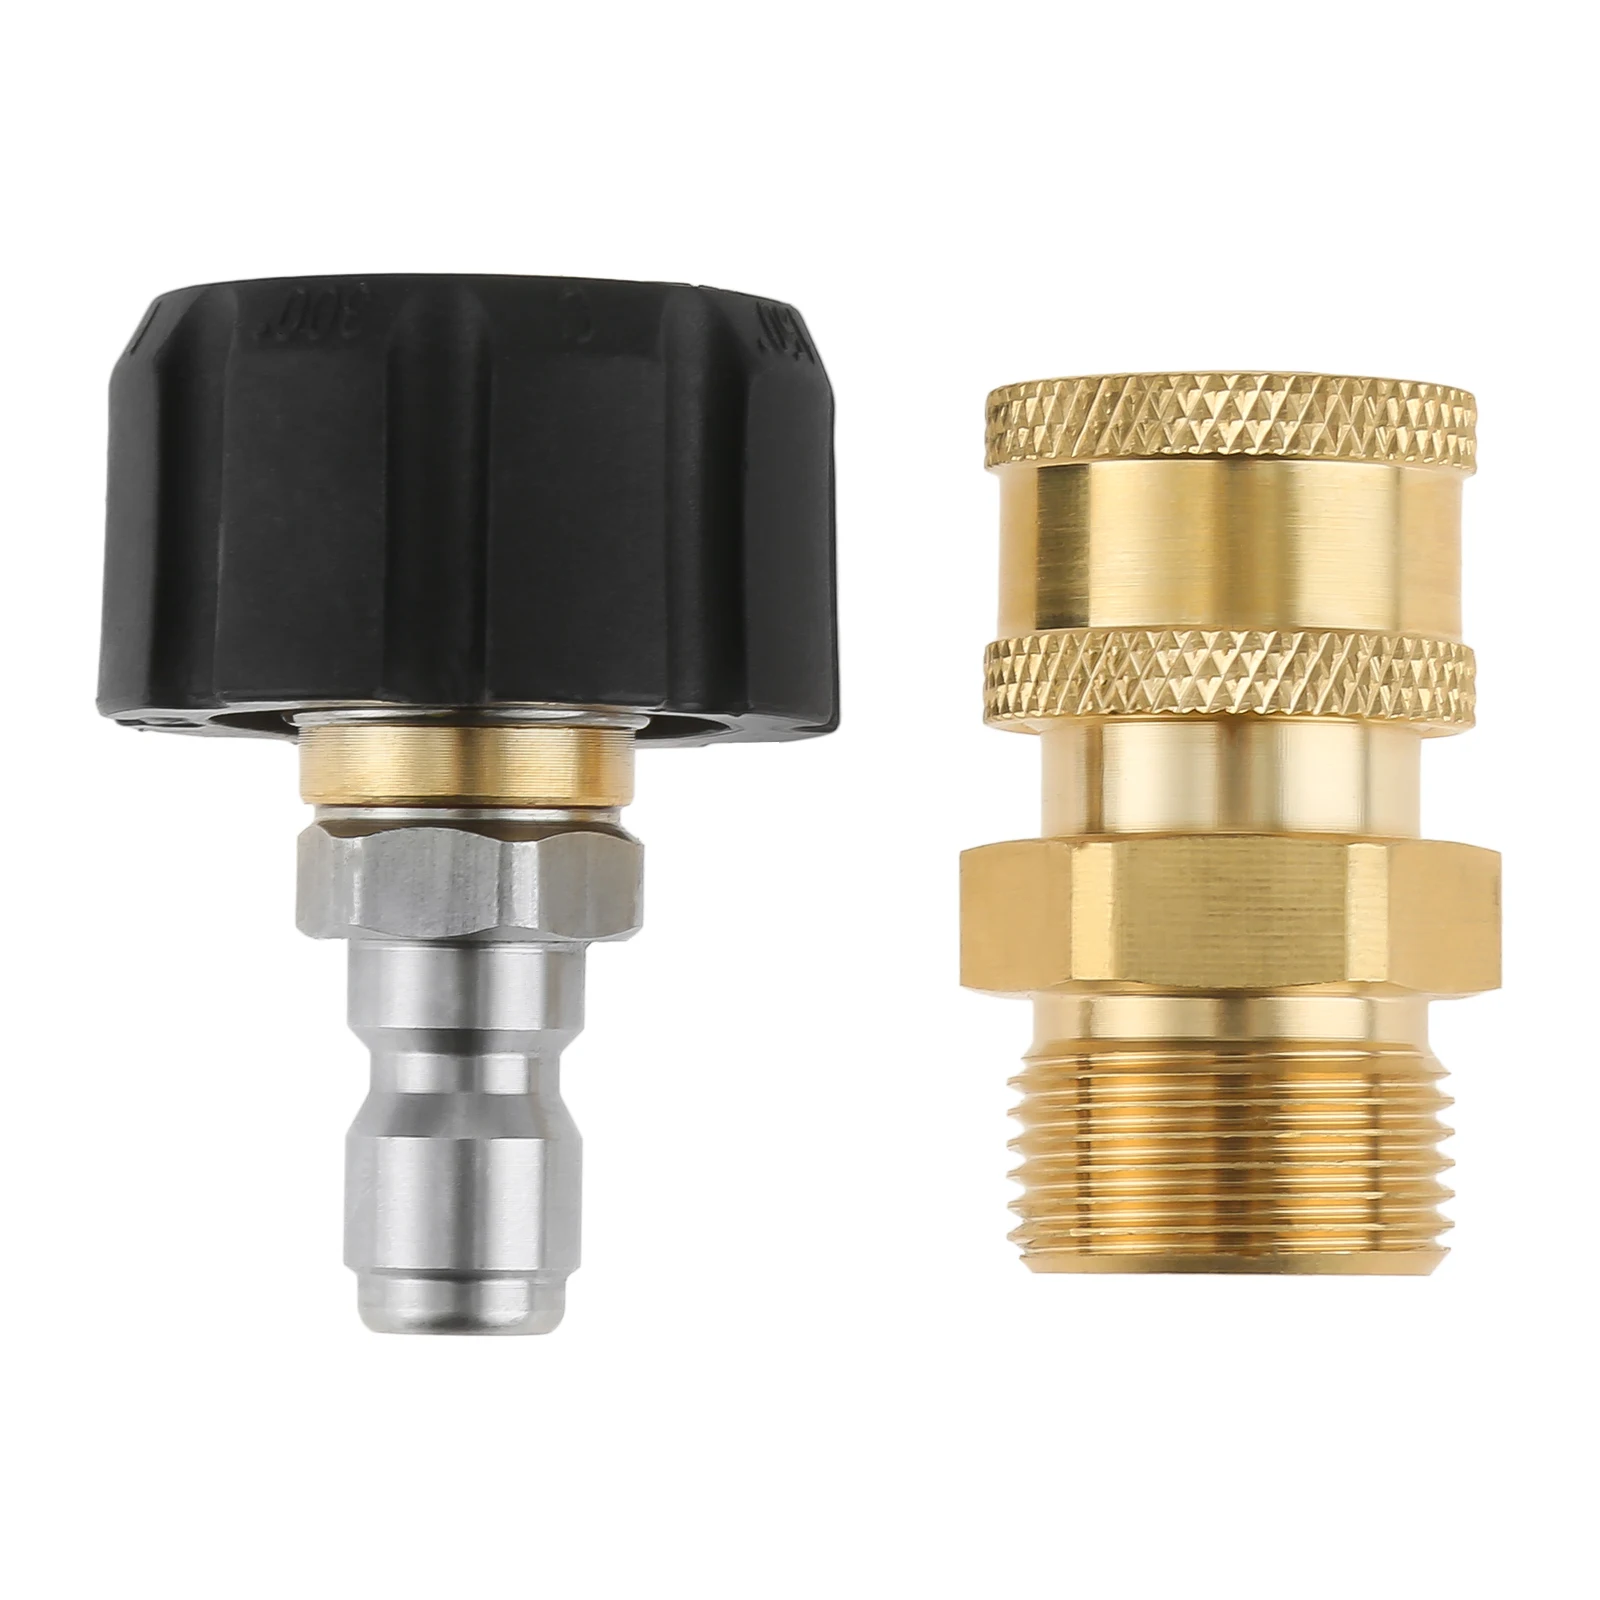 

2pcs/1set High Pressure Washer Adapter Water Car M22 inside 14mm turn to 1/4" Quick Connect/Disconnect Male Plug Female Coupler